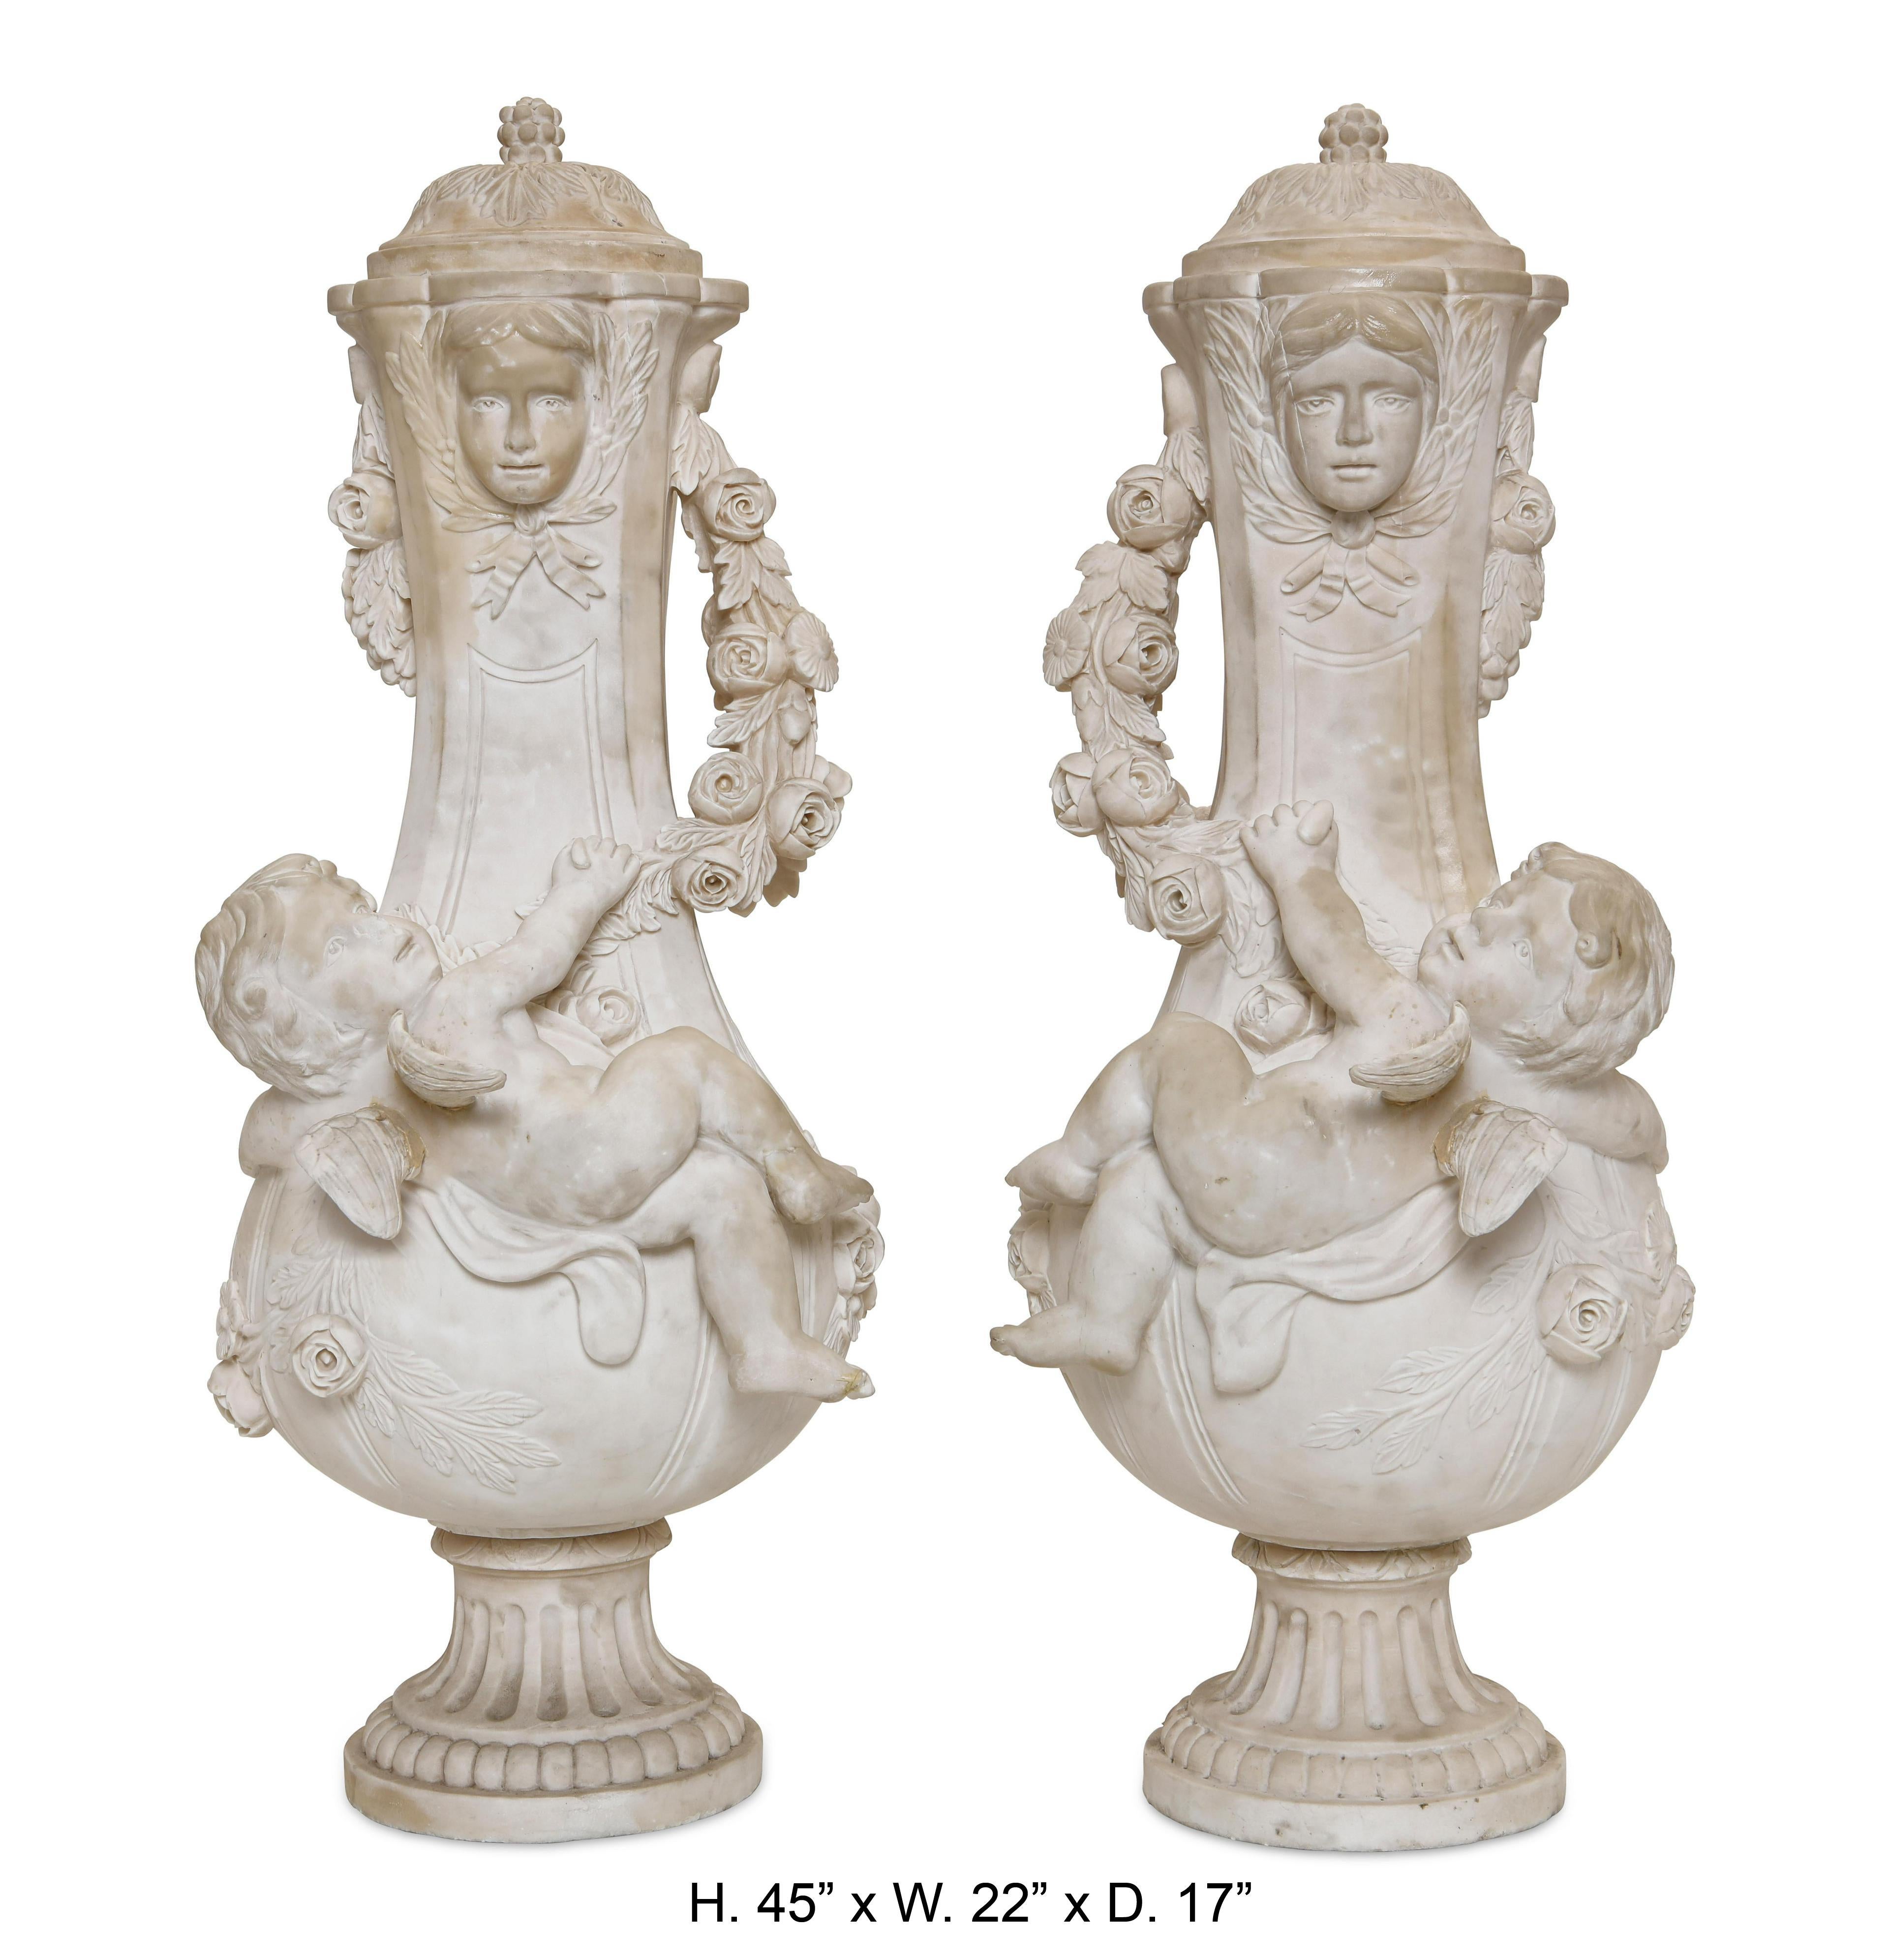 Impressive large pair of French Louis XVI style hand carved white marble urns with cherubs, signed A.Moreau.
Highly attractive and very decorative. 
late 20th century
overall in good condition with some minor repairs
Measures: Height 45in, width